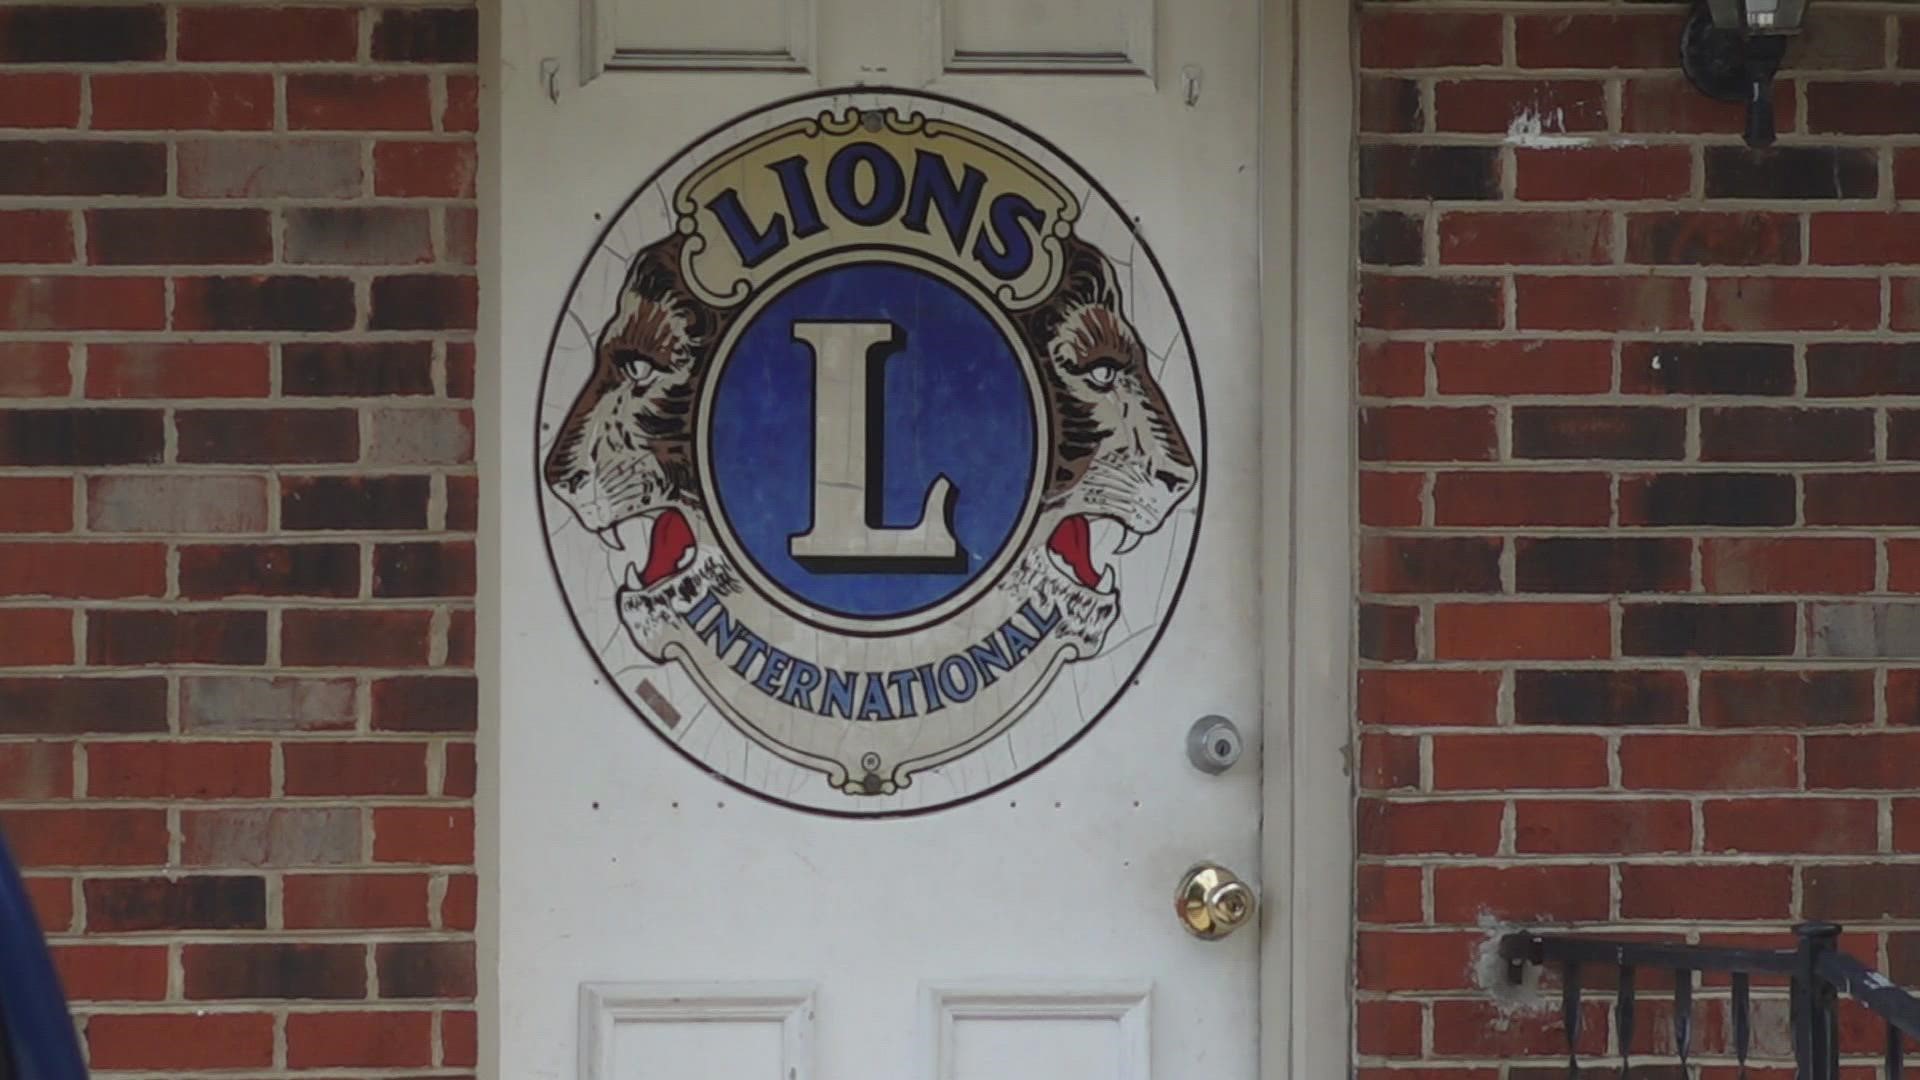 Two other guests were allowed to stay. Executive Director Valerie Stewart said that's because they were former board members and/or Lions Club members.